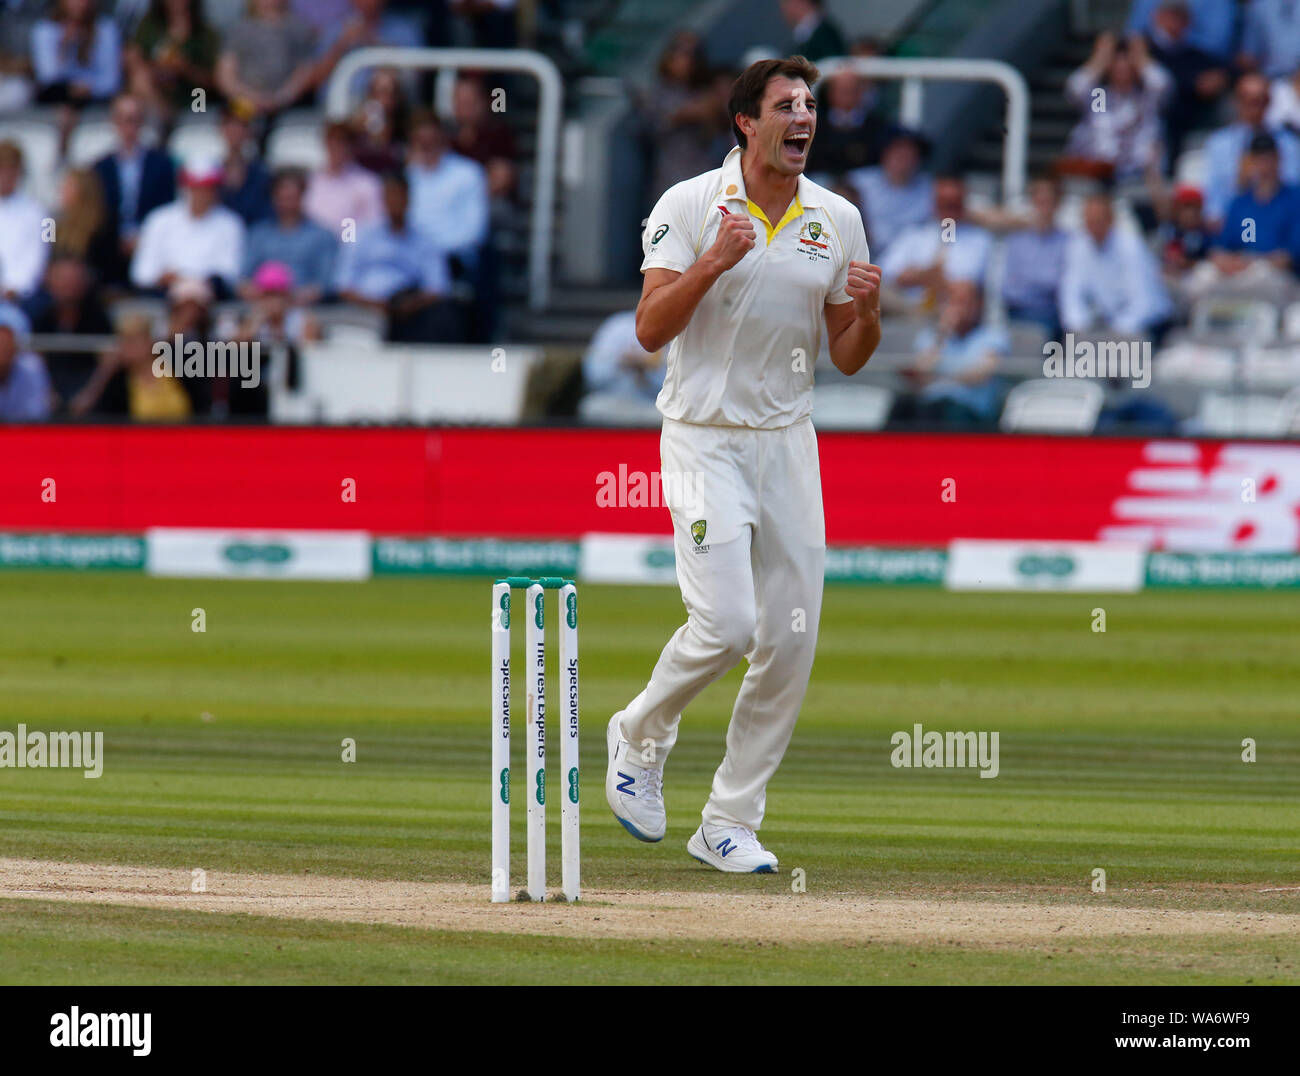 London, UK. 18 August 2019. Pat Cummins of Australia celebrates the catch of Jos Buttler of England by au28 during play on the 5th day  of the second Ashes cricket Test match between England and Australia at Lord's Cricket ground in London, England on August 18, 2019 Credit: Action Foto Sport/Alamy Live News Stock Photo